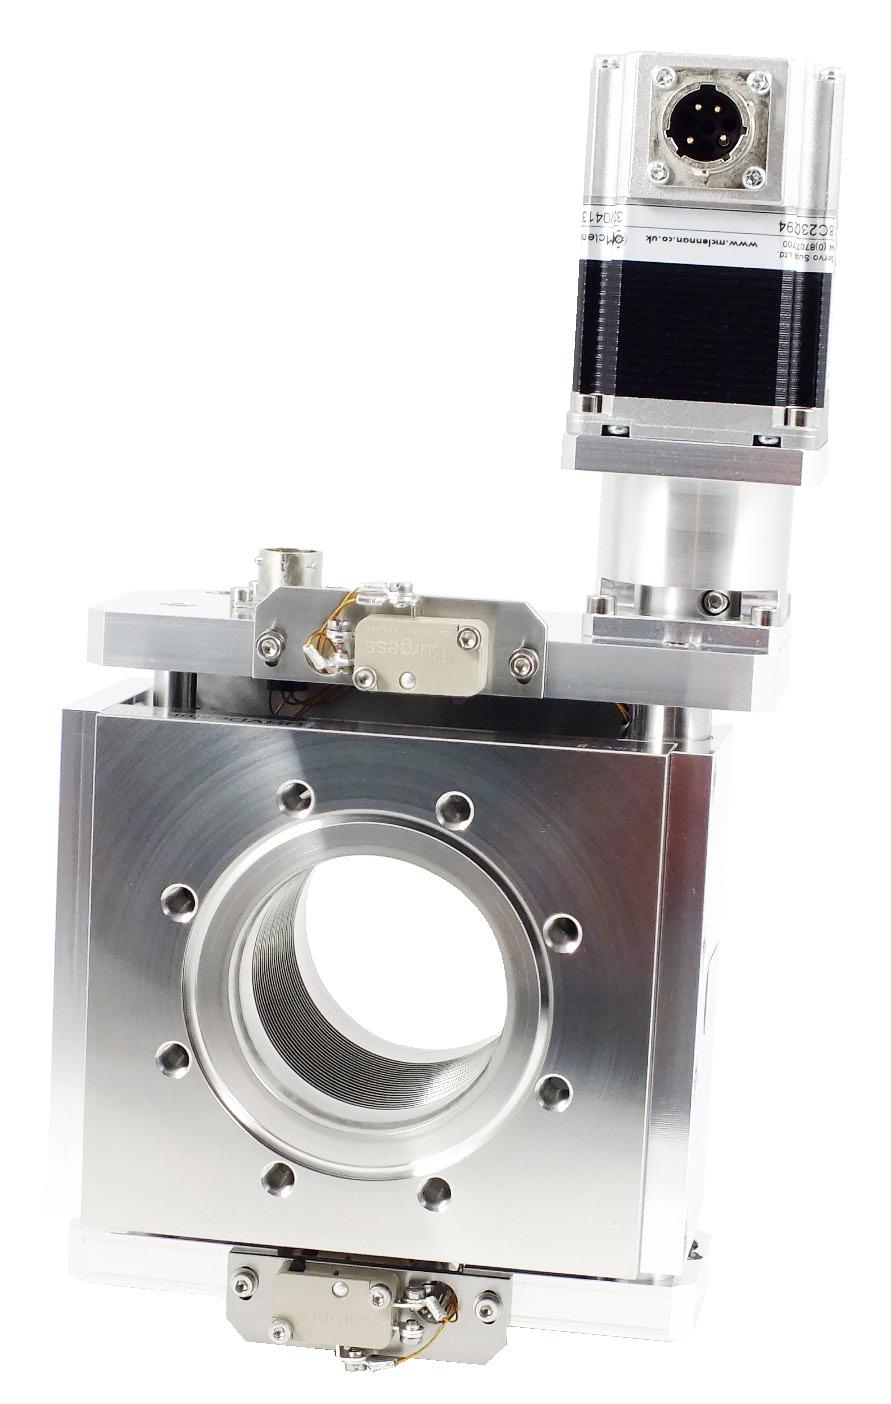 0»Bellows-sealed» all-metal vacuum enclosure Overview The Y-Shifts provide accurate, repeatable axial alignment on the Y-axis, and might be used in conjunction with a sample transfer arm, such as a